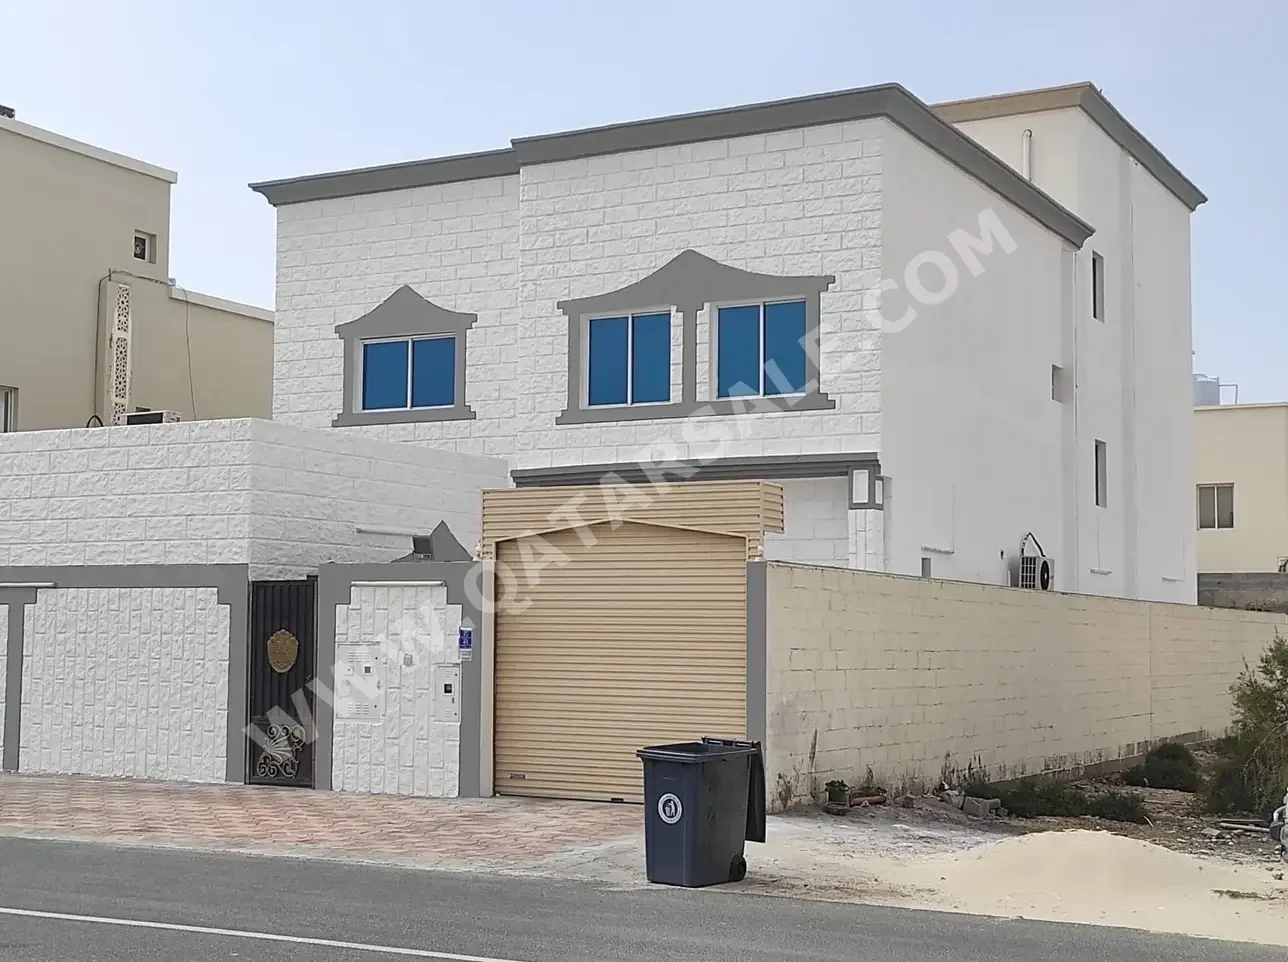 Family Residential  Not Furnished  Al Daayen  Umm Qarn  6 Bedrooms  Includes Water & Electricity